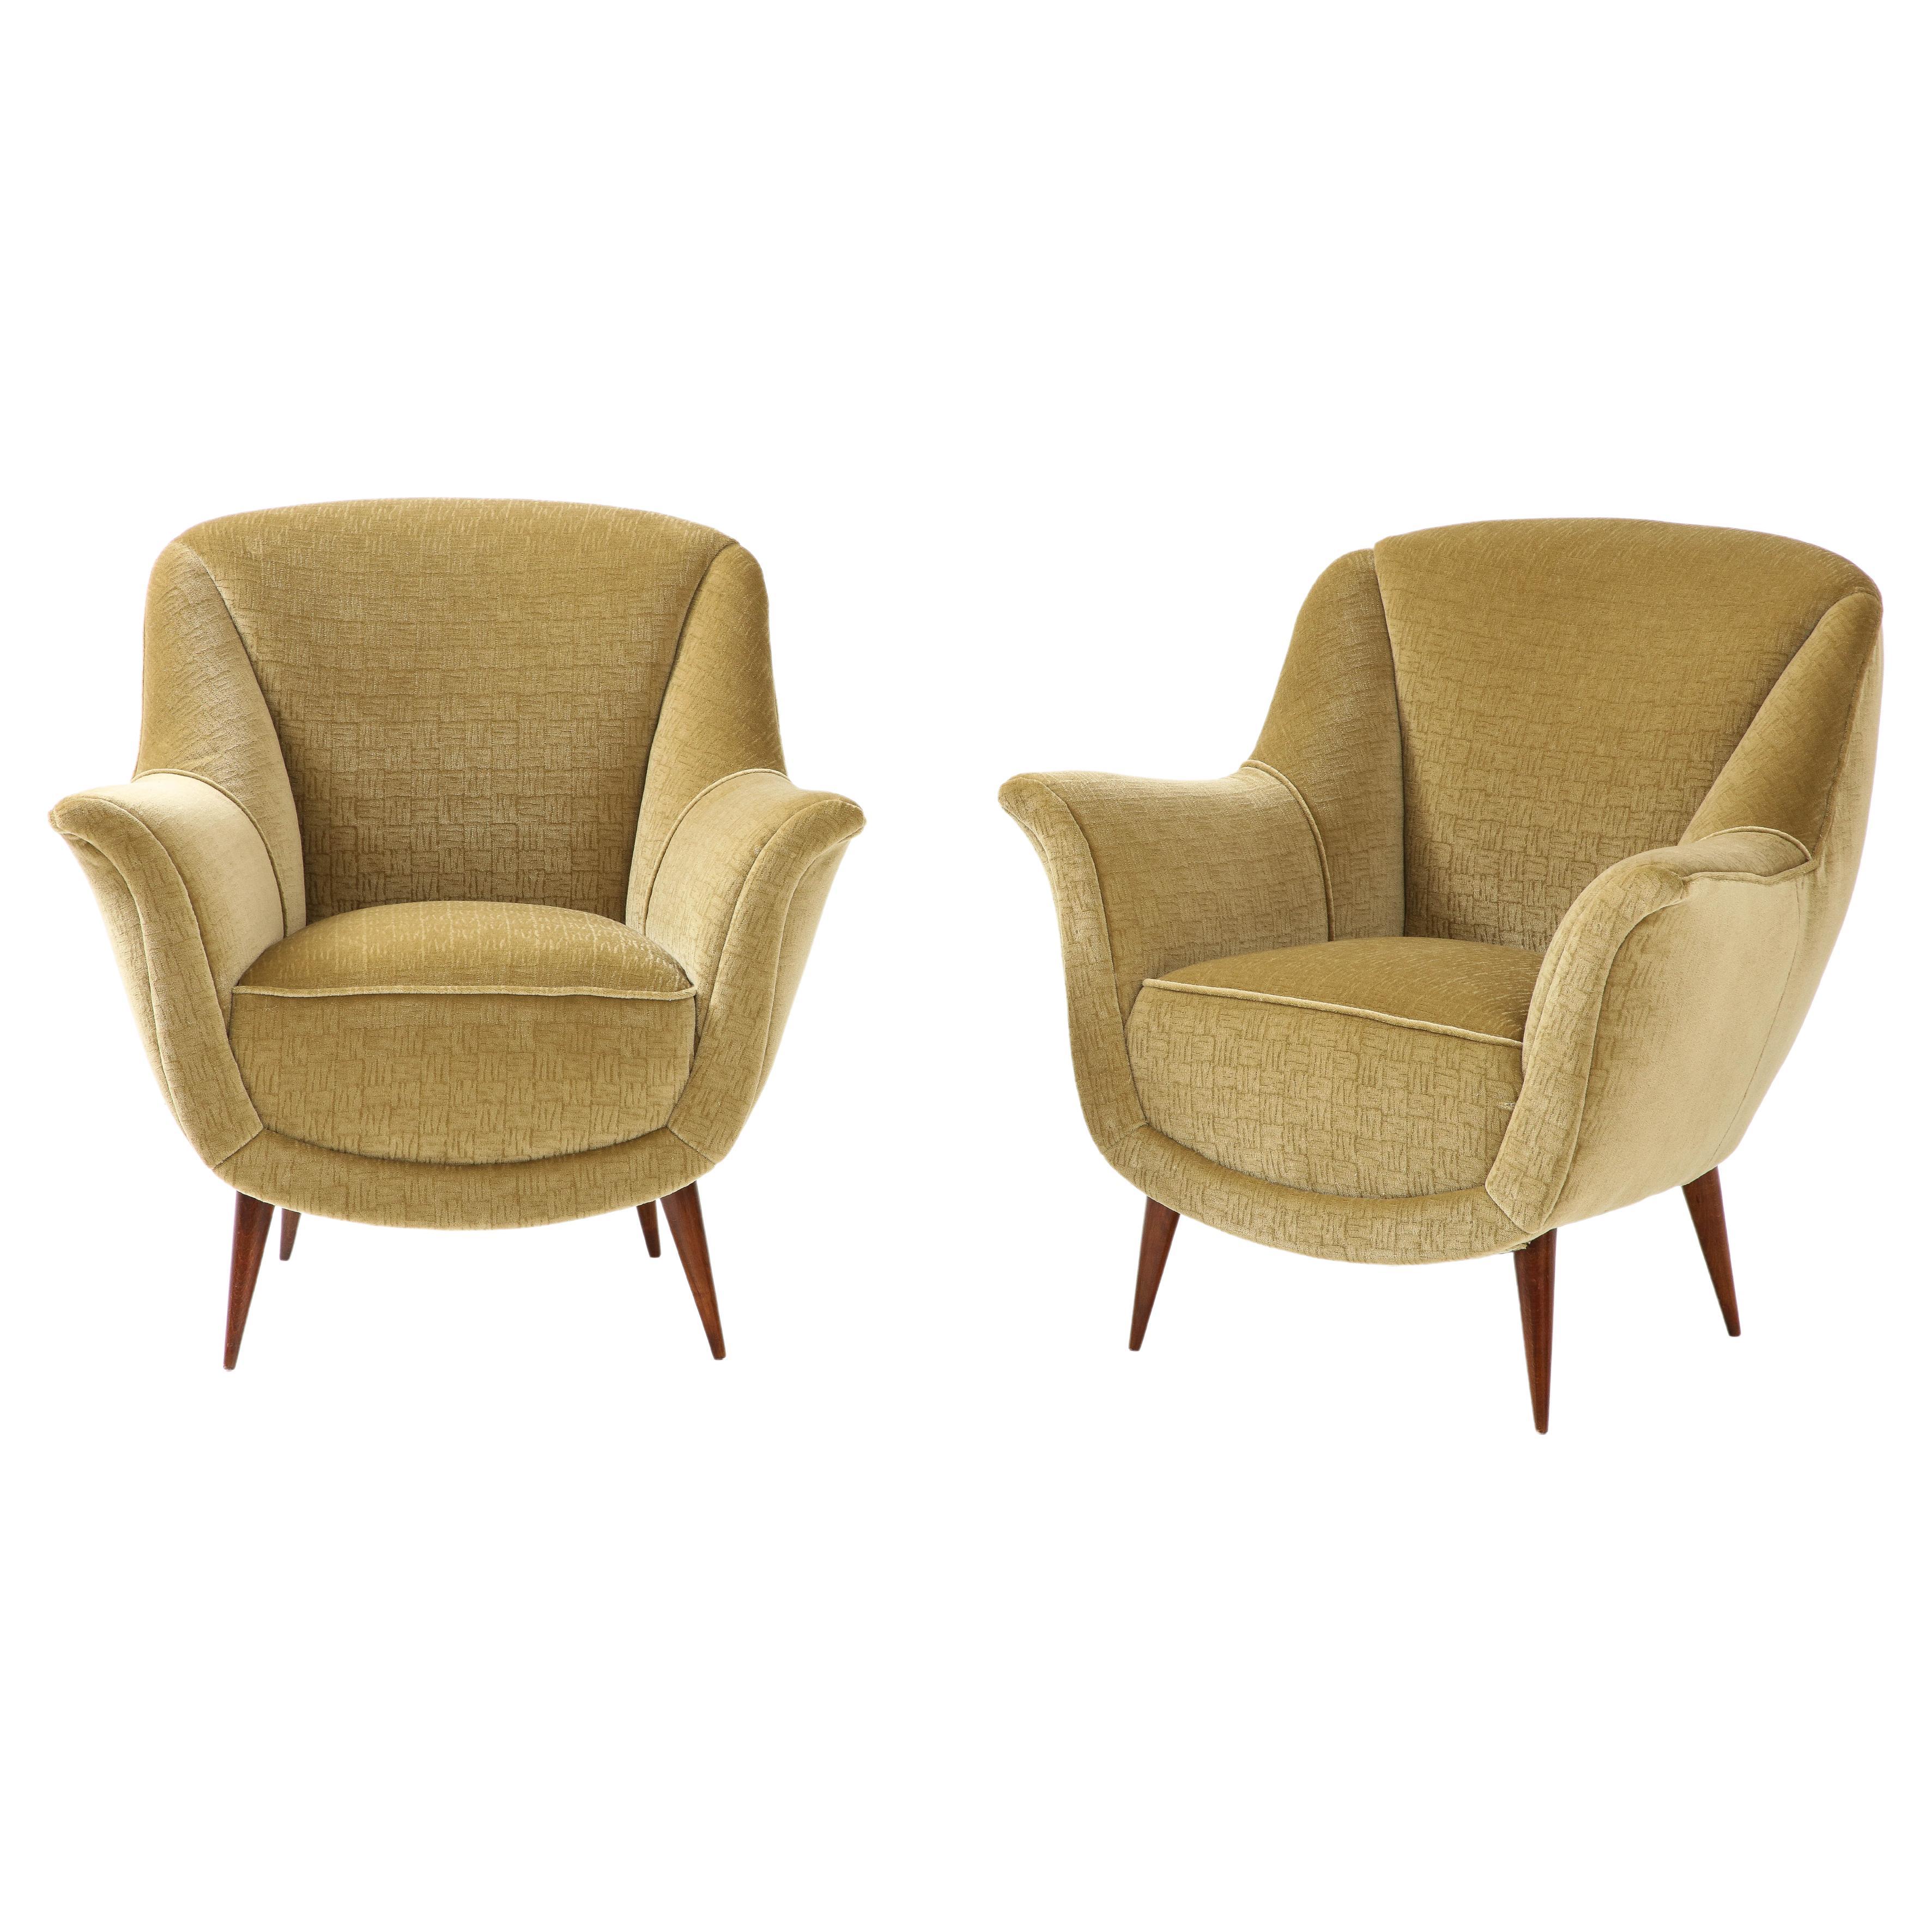 1950's Modernist Gio Ponti Style Italian Lounge Chairs In Mohair Polsterung